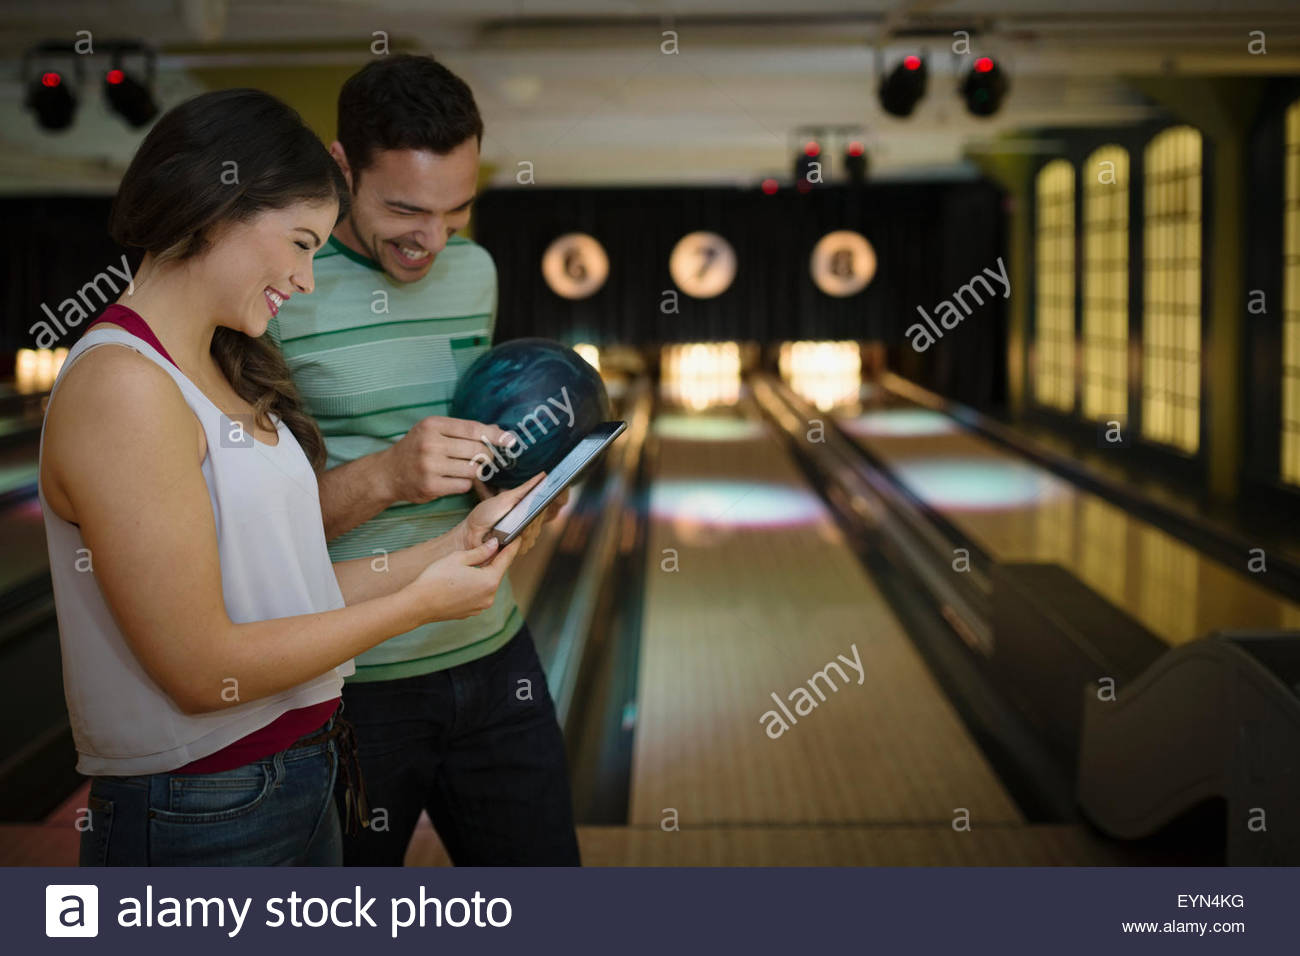 Young couple using digital tablet at bowling alley Stock Photo